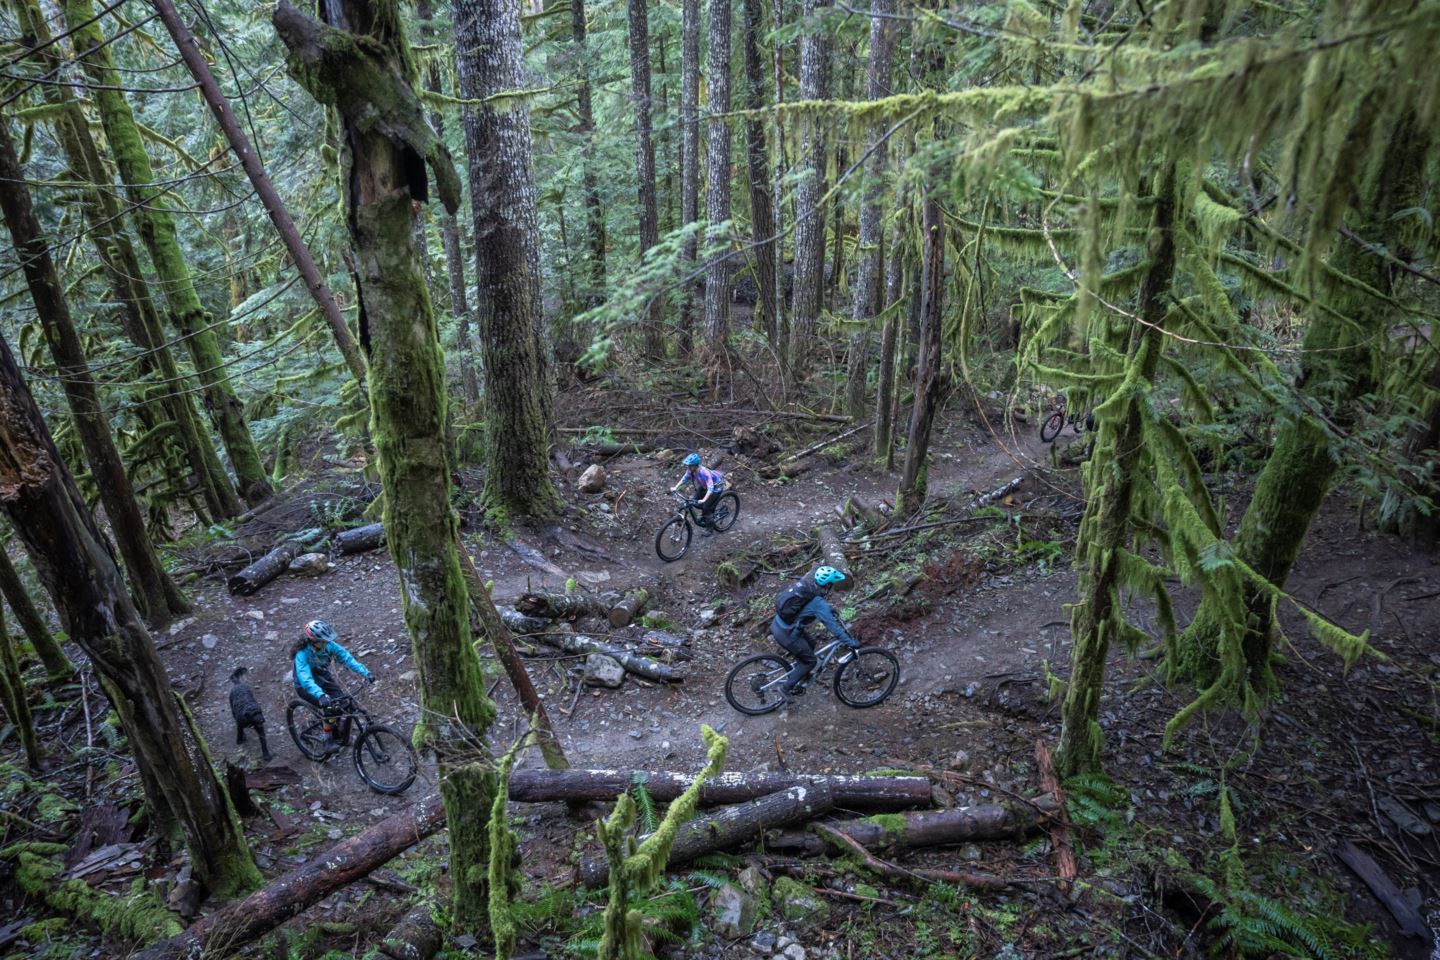 Riders pedaling up a switchback, as seen from above